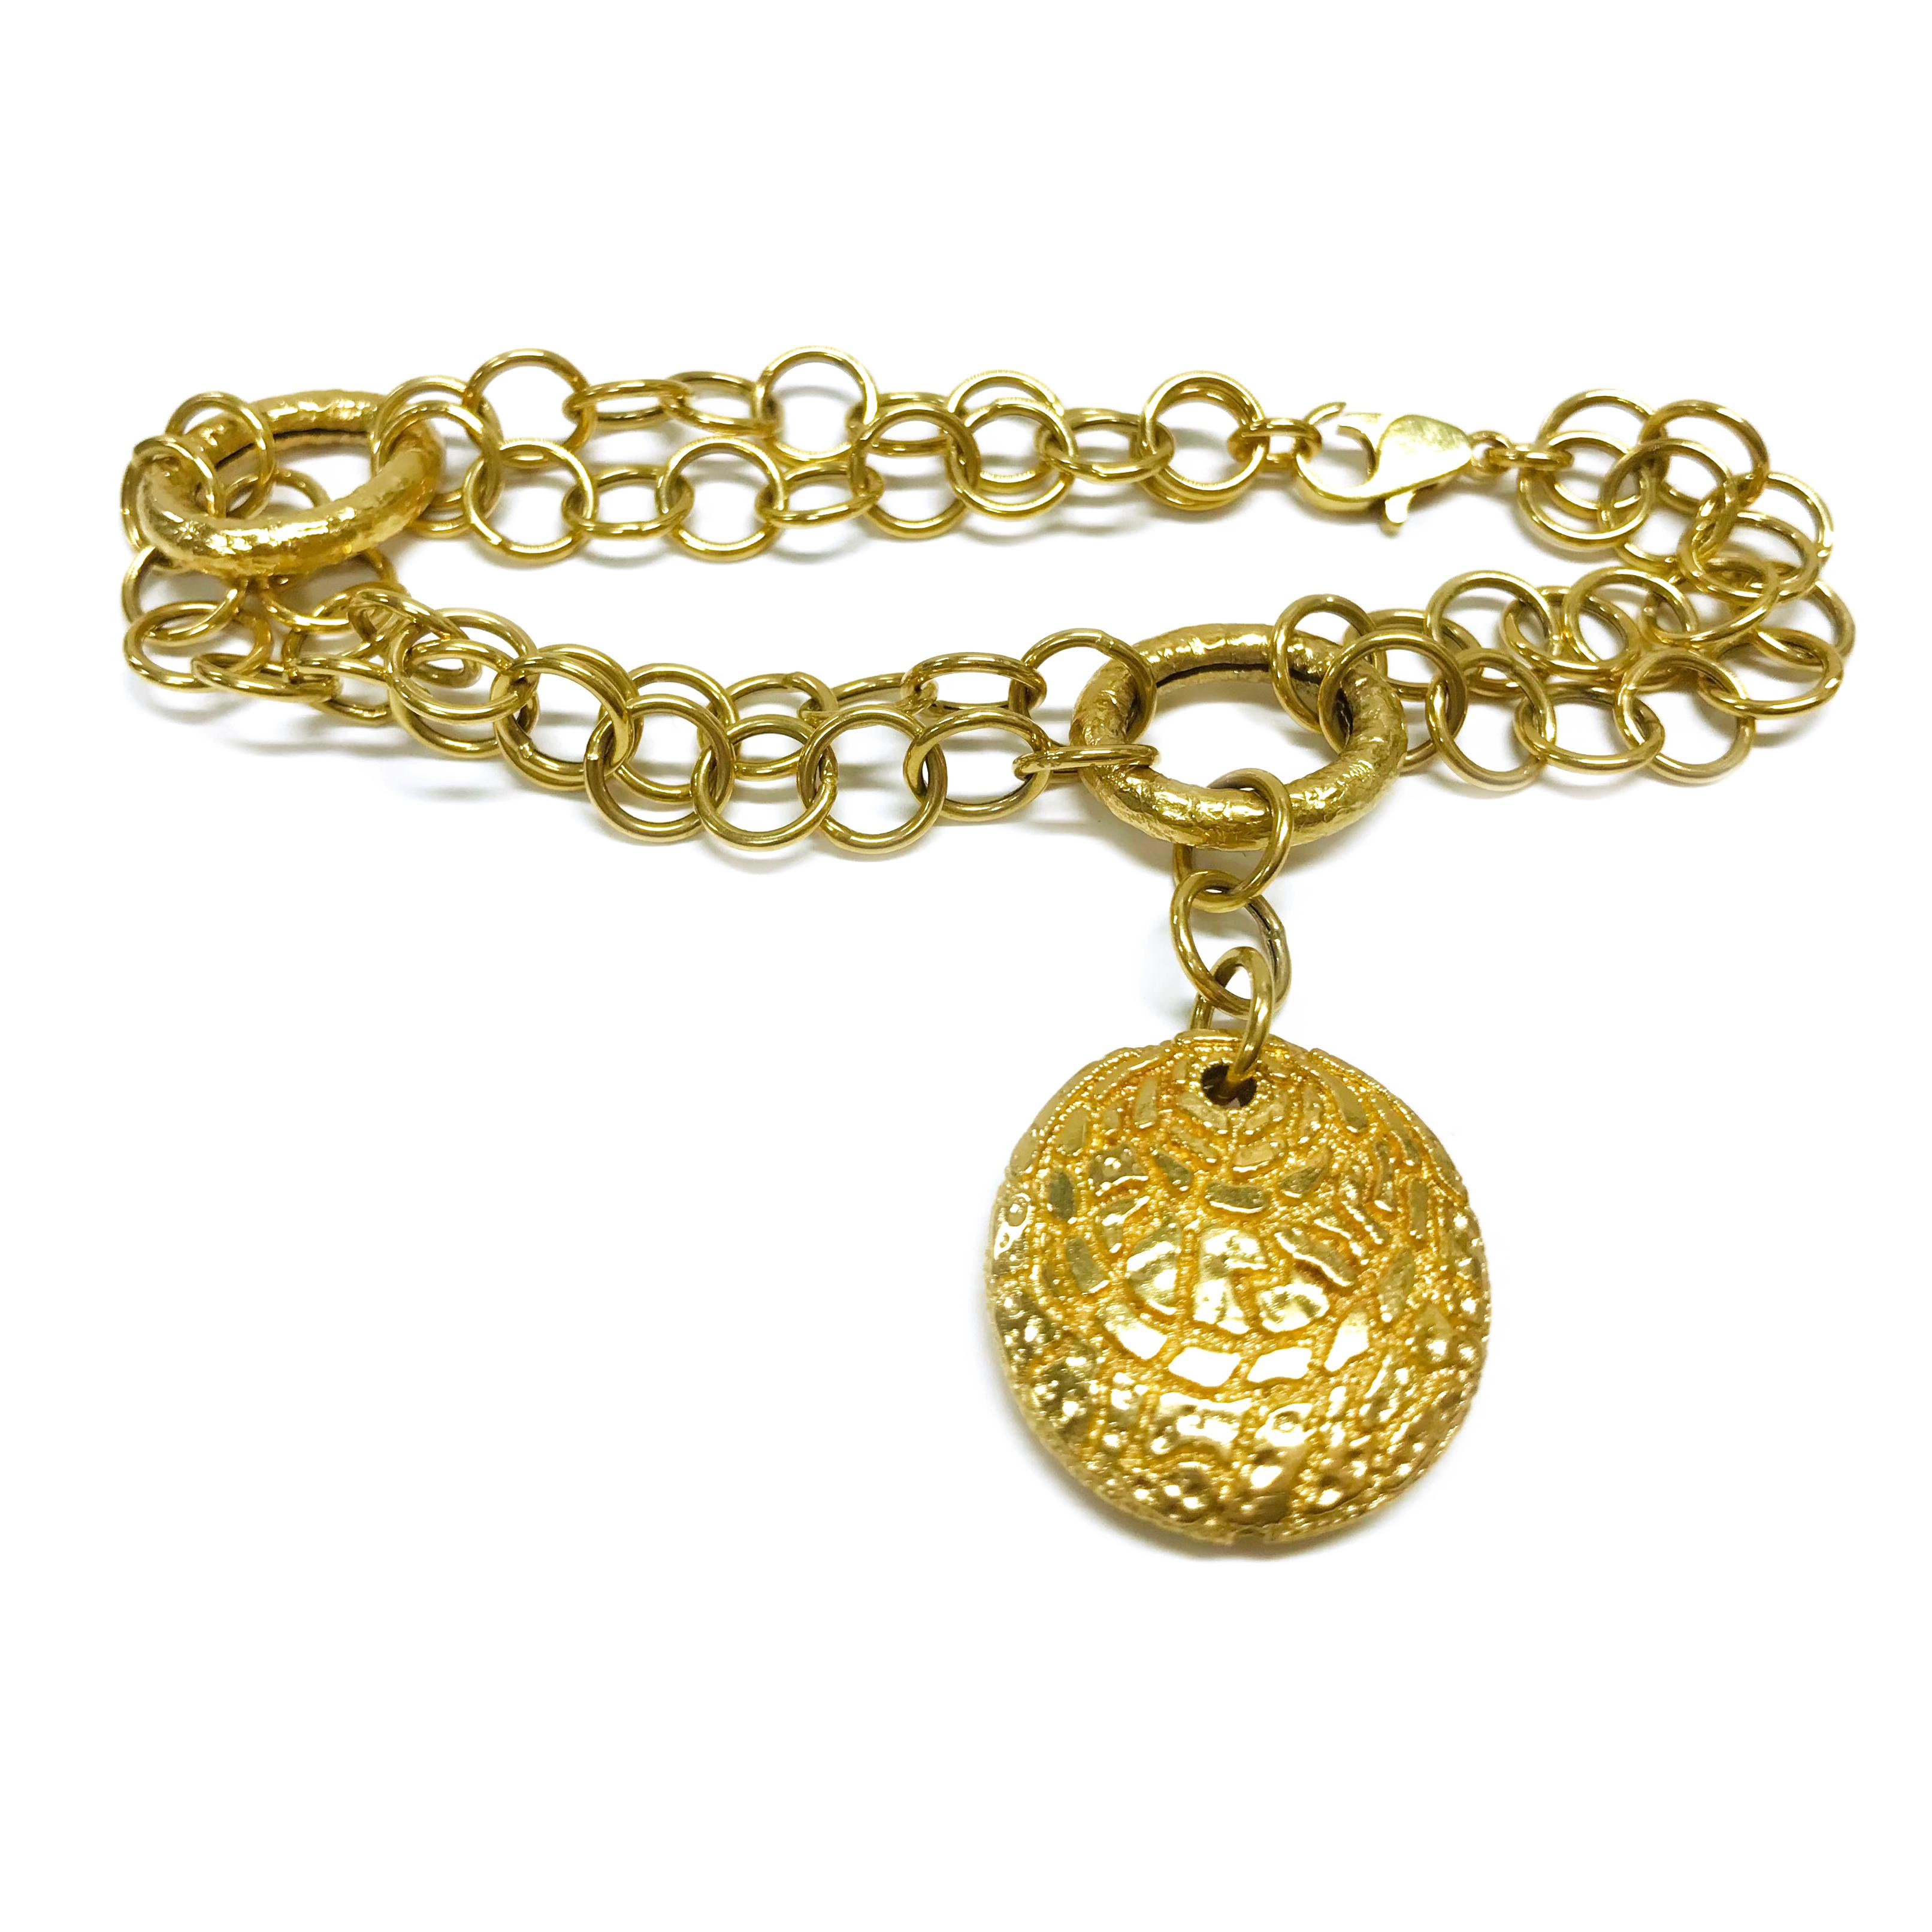 18 Karat Italian Charm Link Bracelet. This bracelet features double-round links with two larger hollow oval links and a single disc shaped charm. The hollow disc charm has a nugget texture and is approximately 0.79